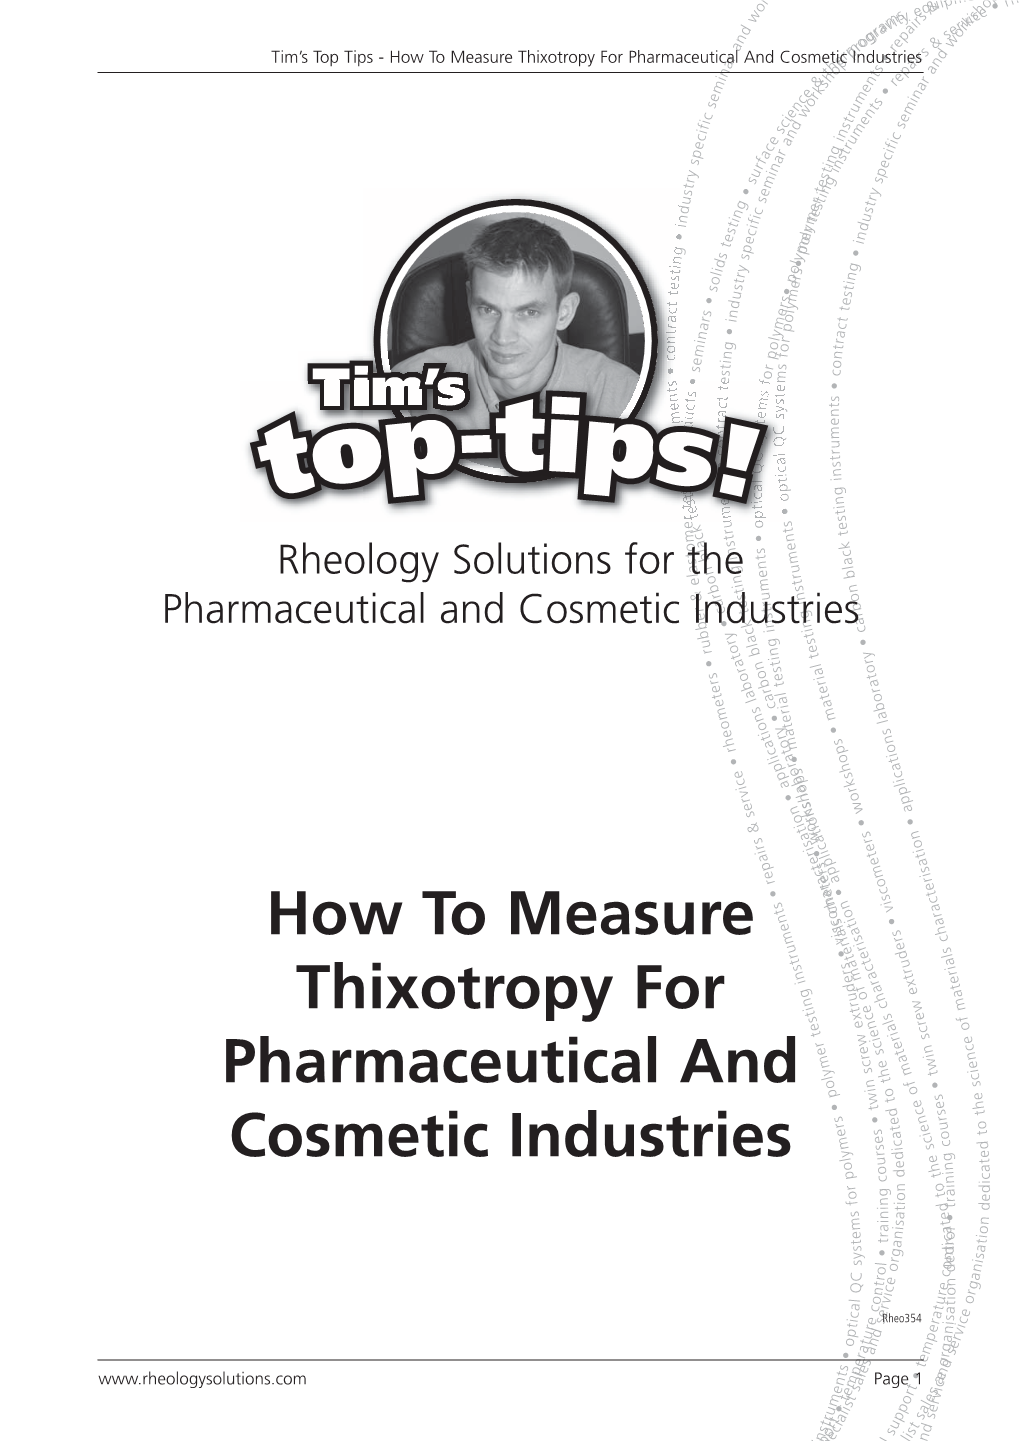 How to Measure Thixotropy for Pharmaceutical and Cosmetic